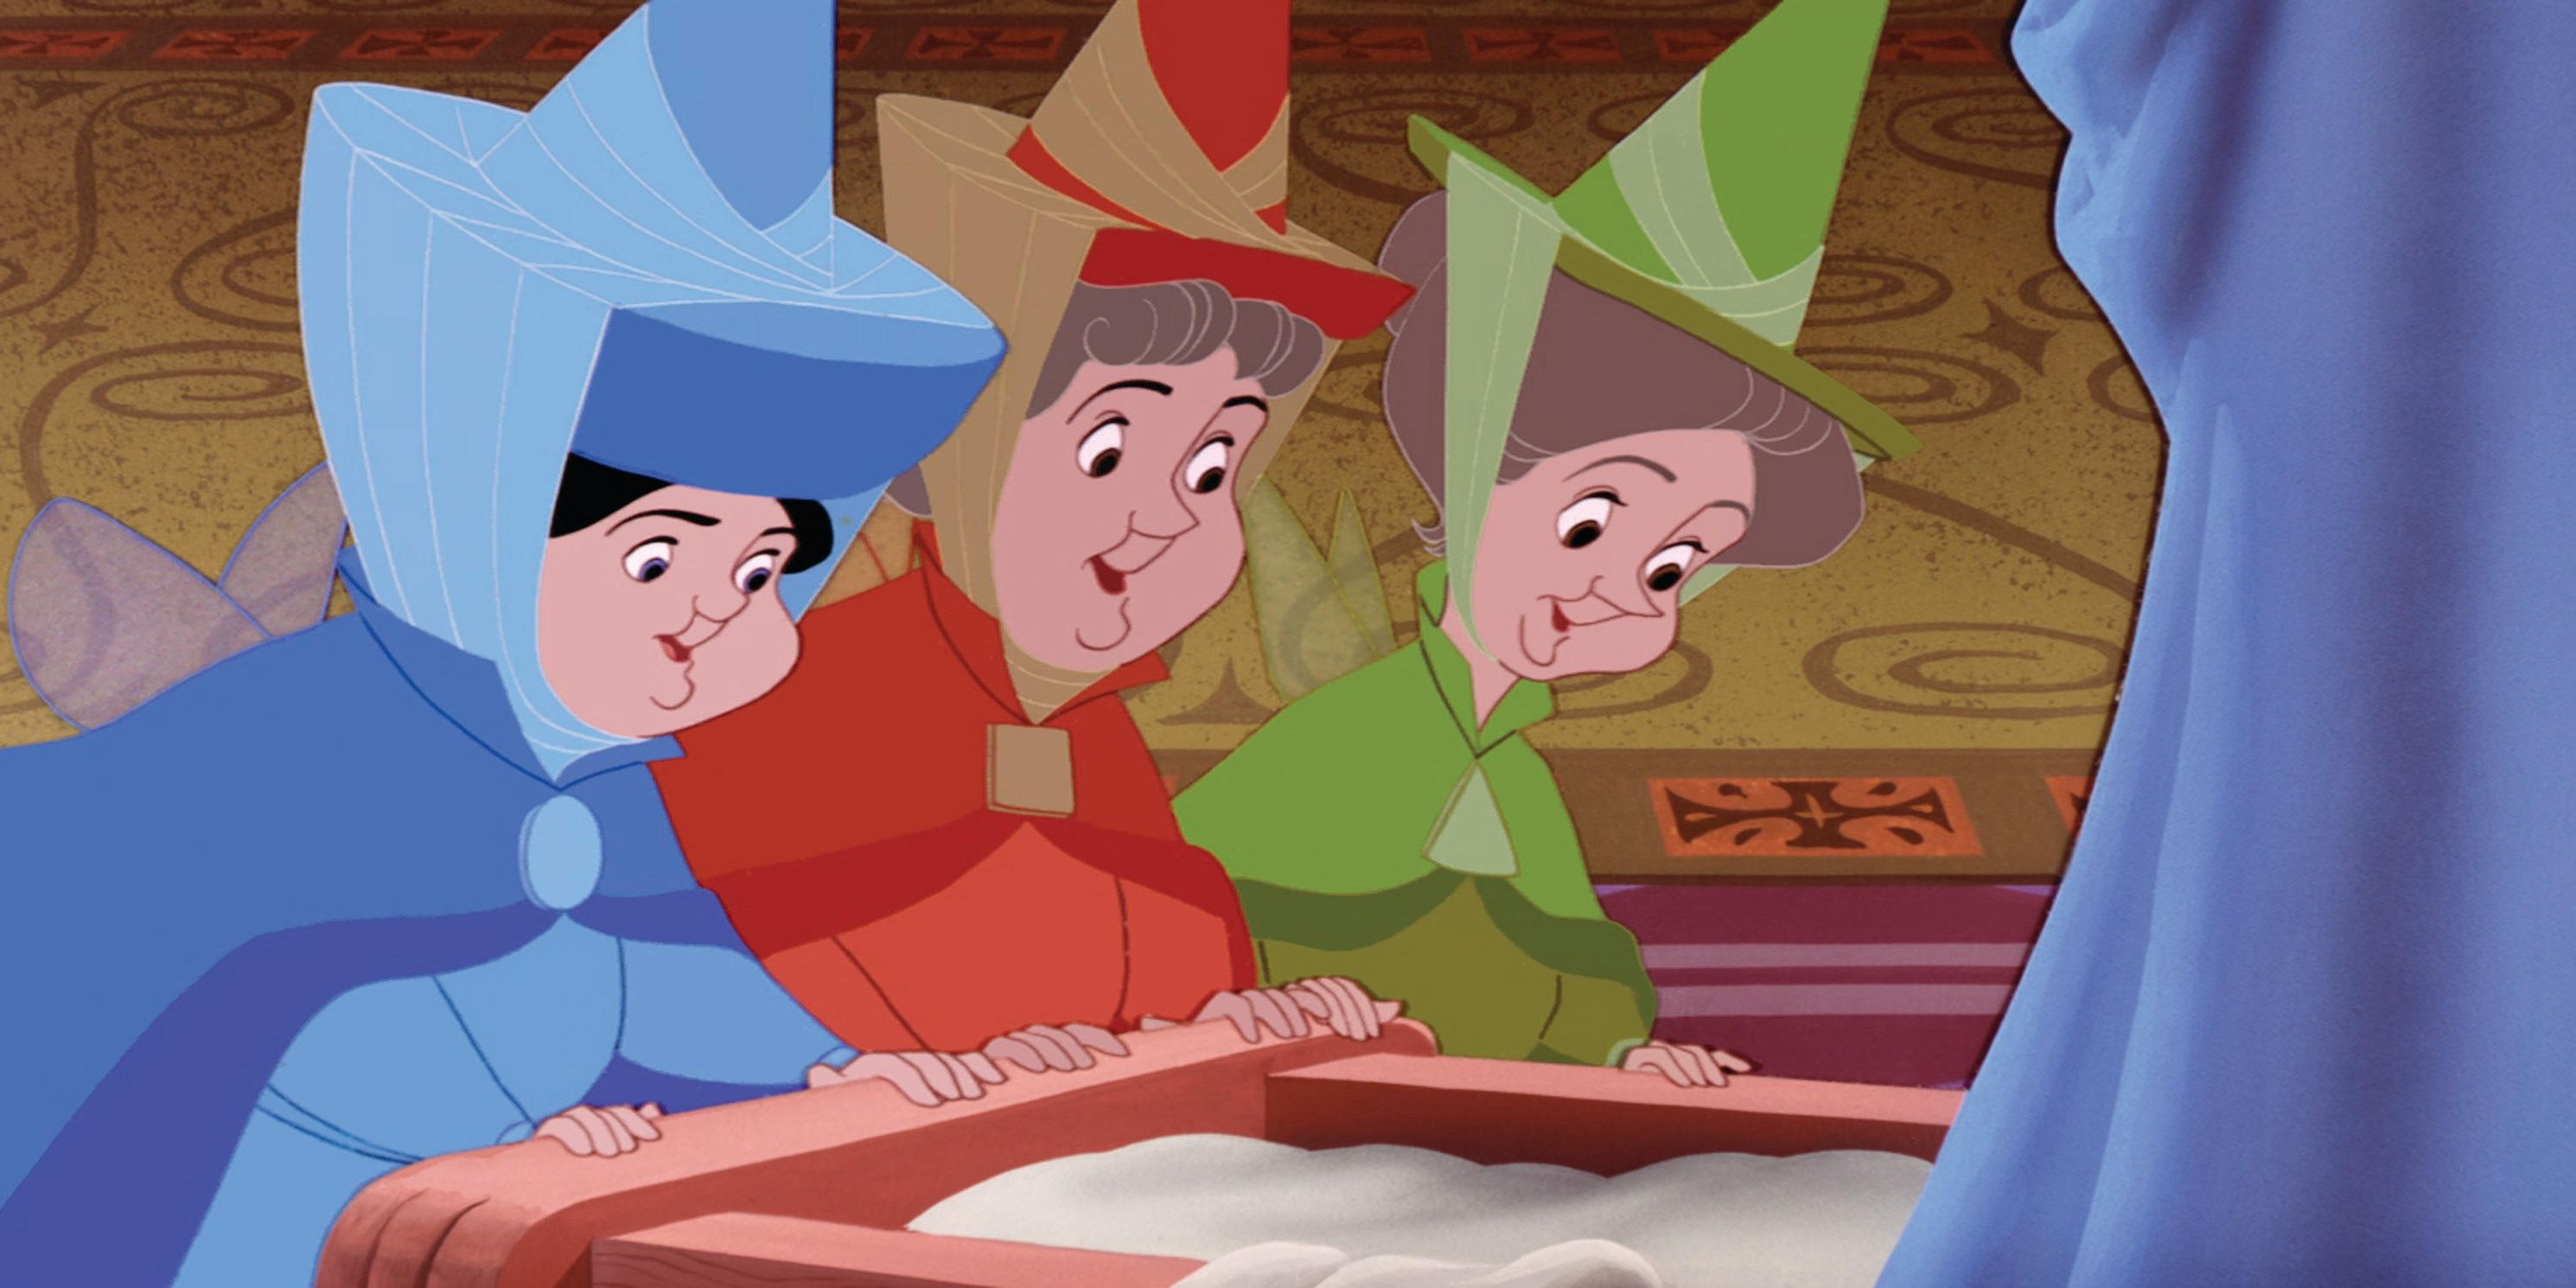 Merryweather, Flora and Fauna admiring a baby Aurora in Sleeping Beauty